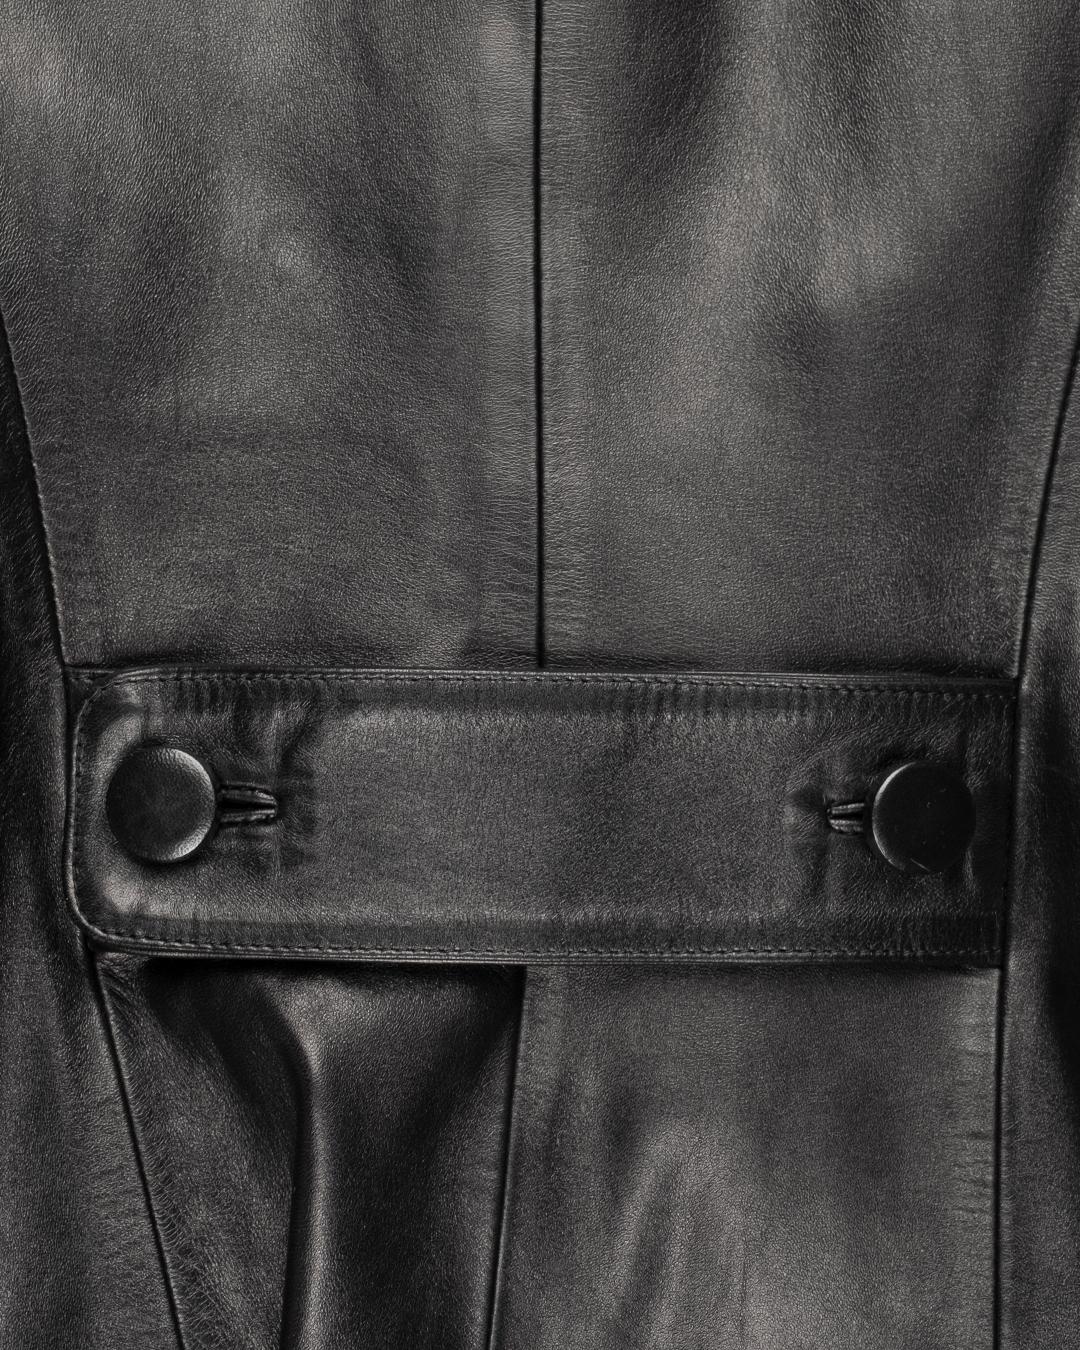 Yves Saint Laurent AW2001 Leather Officer Jacket For Sale 3